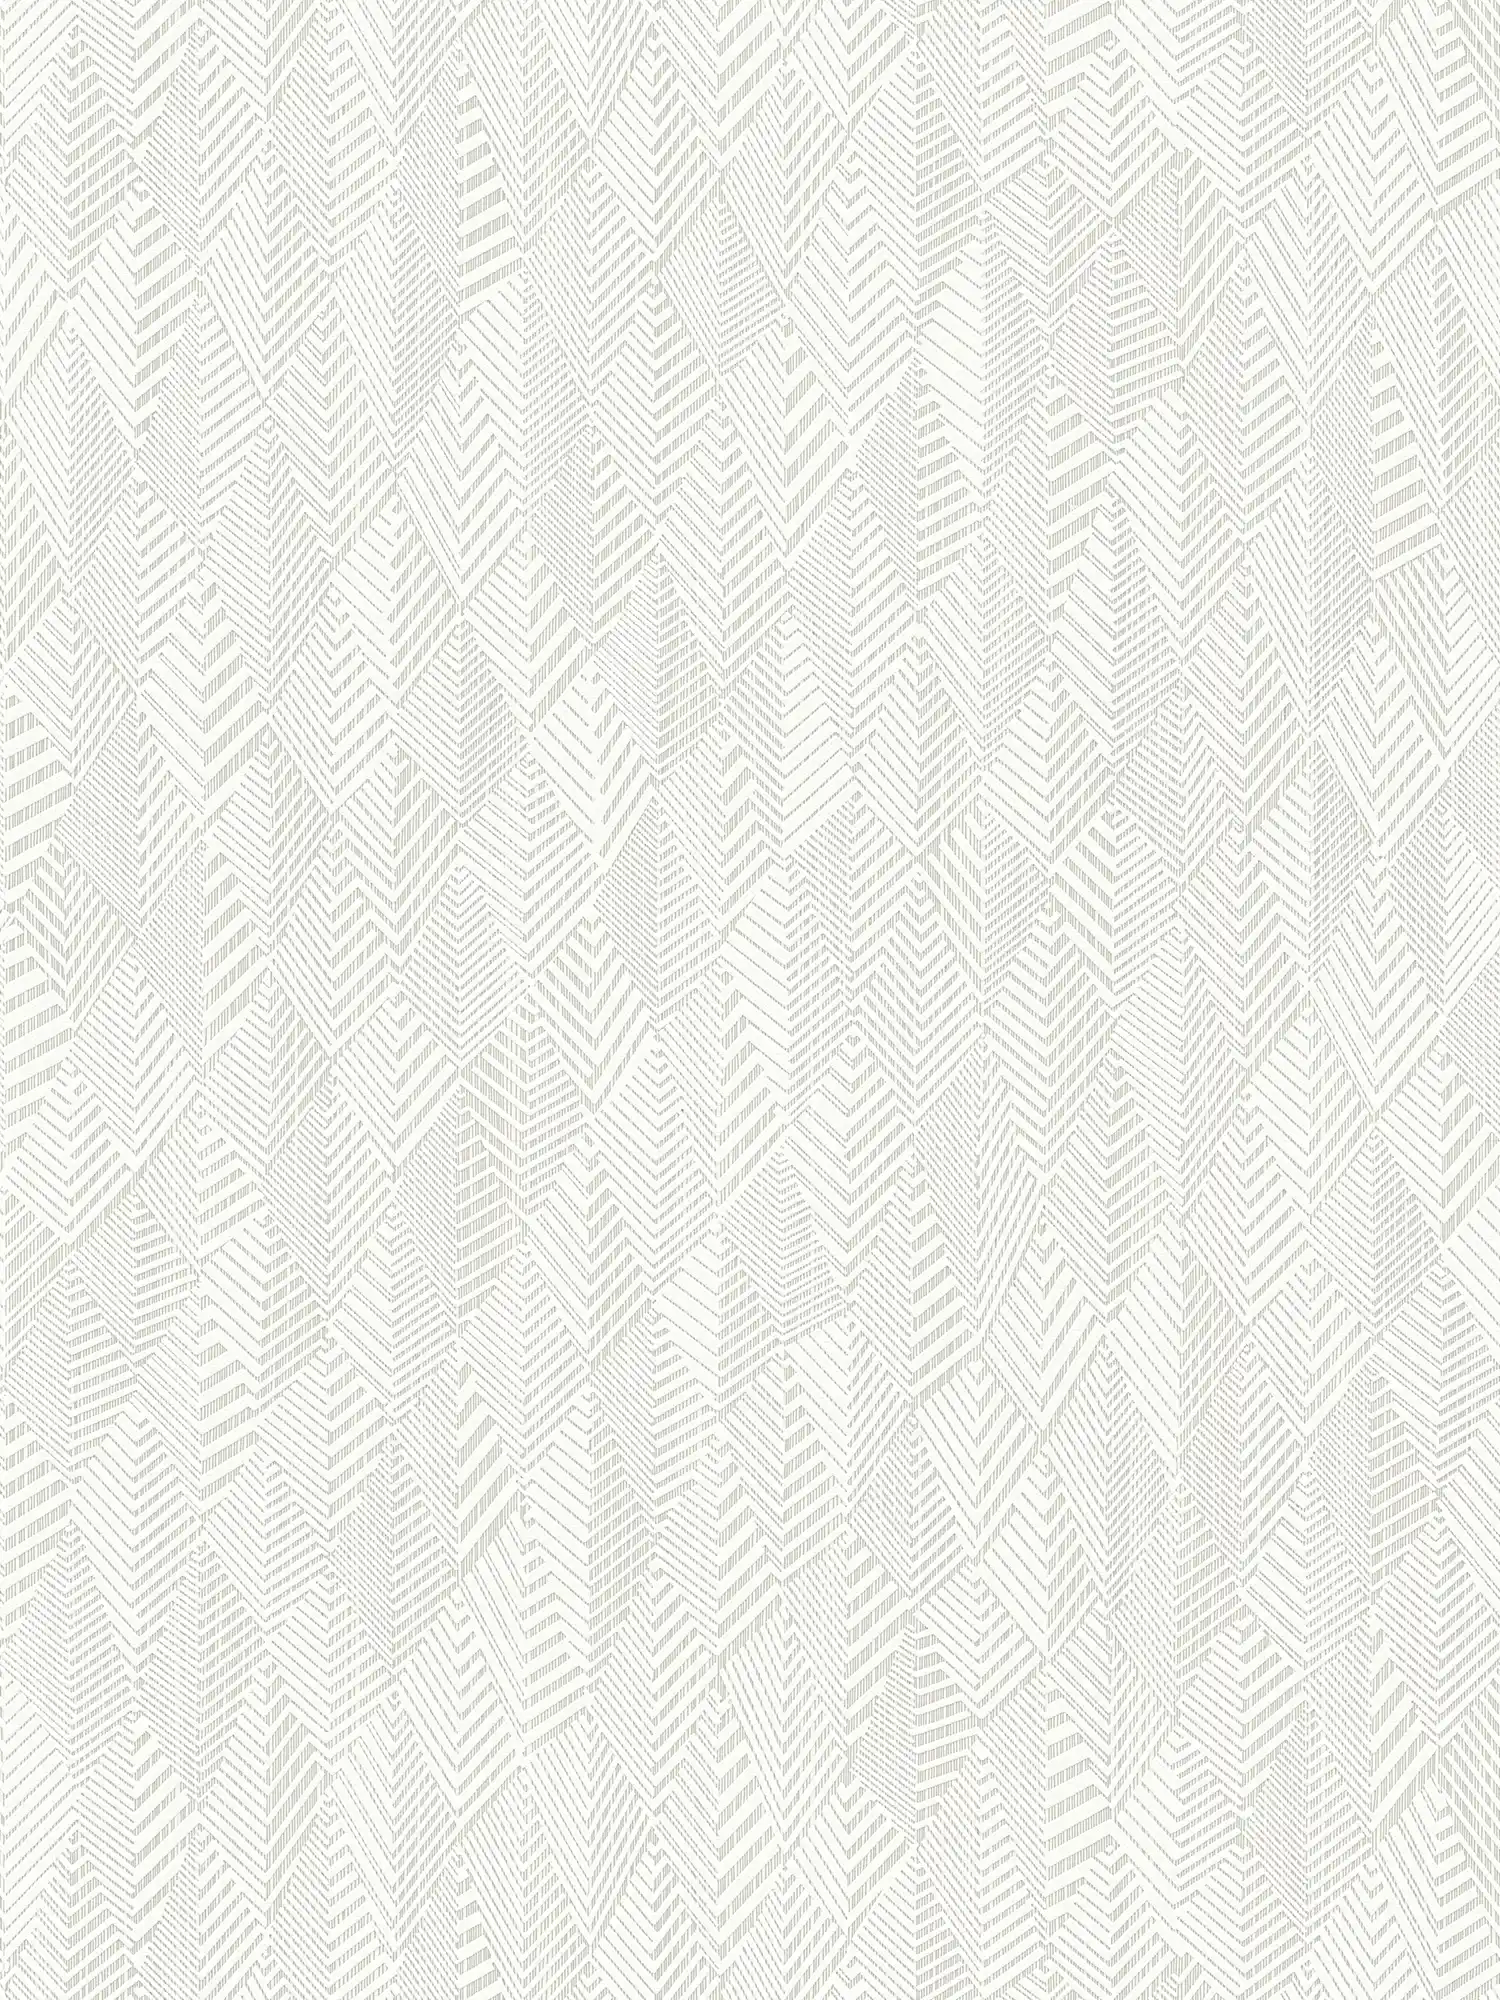 Plain wallpaper with abstract line pattern - cream, white
